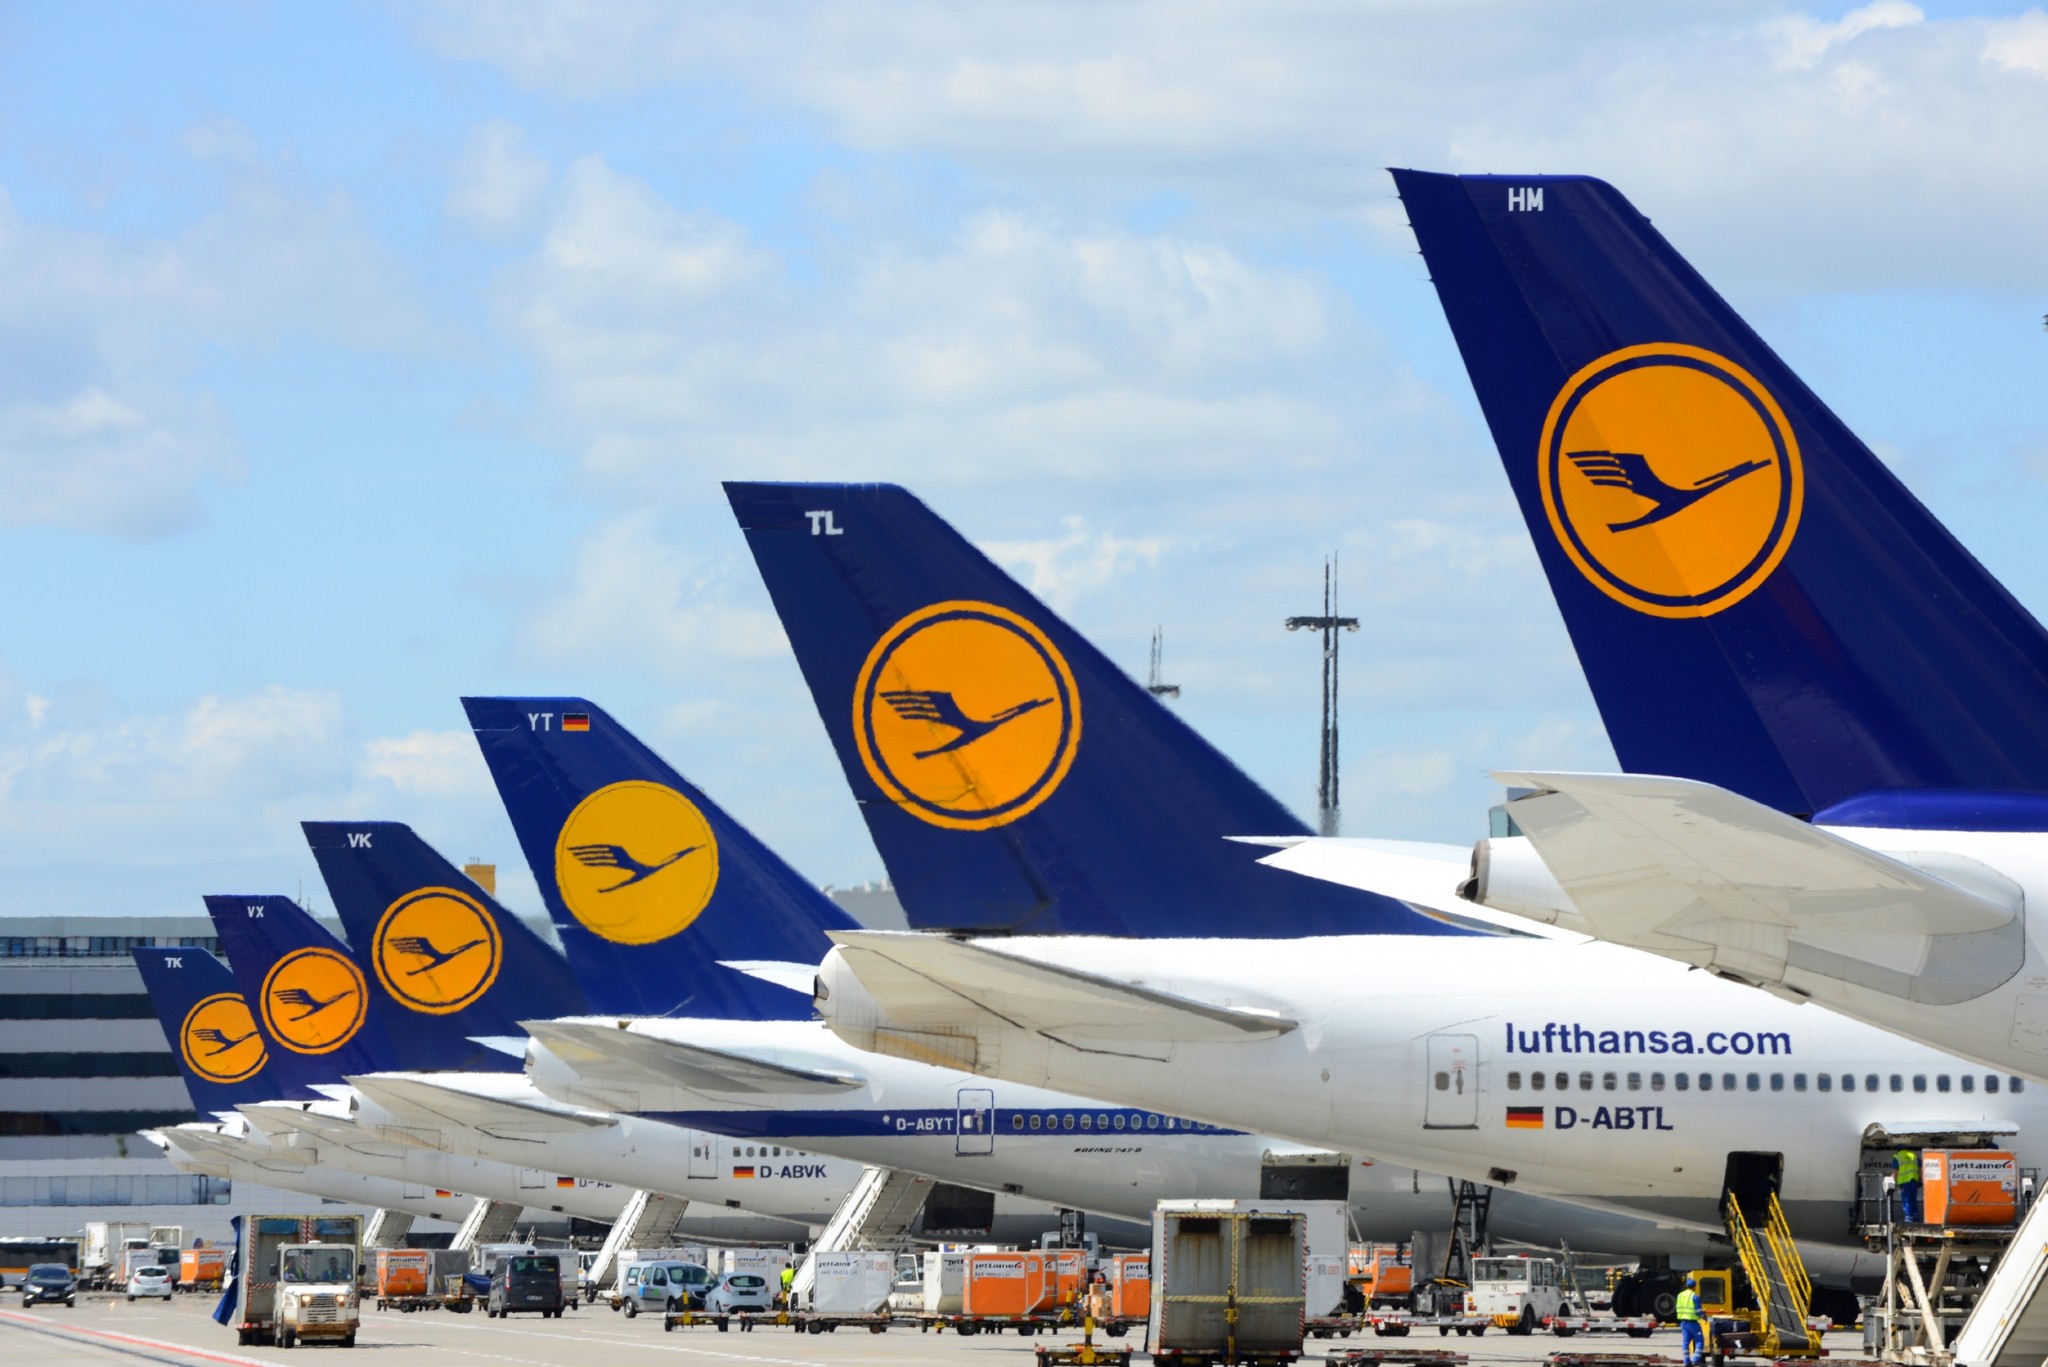 Lufthansa Group reports October traffic